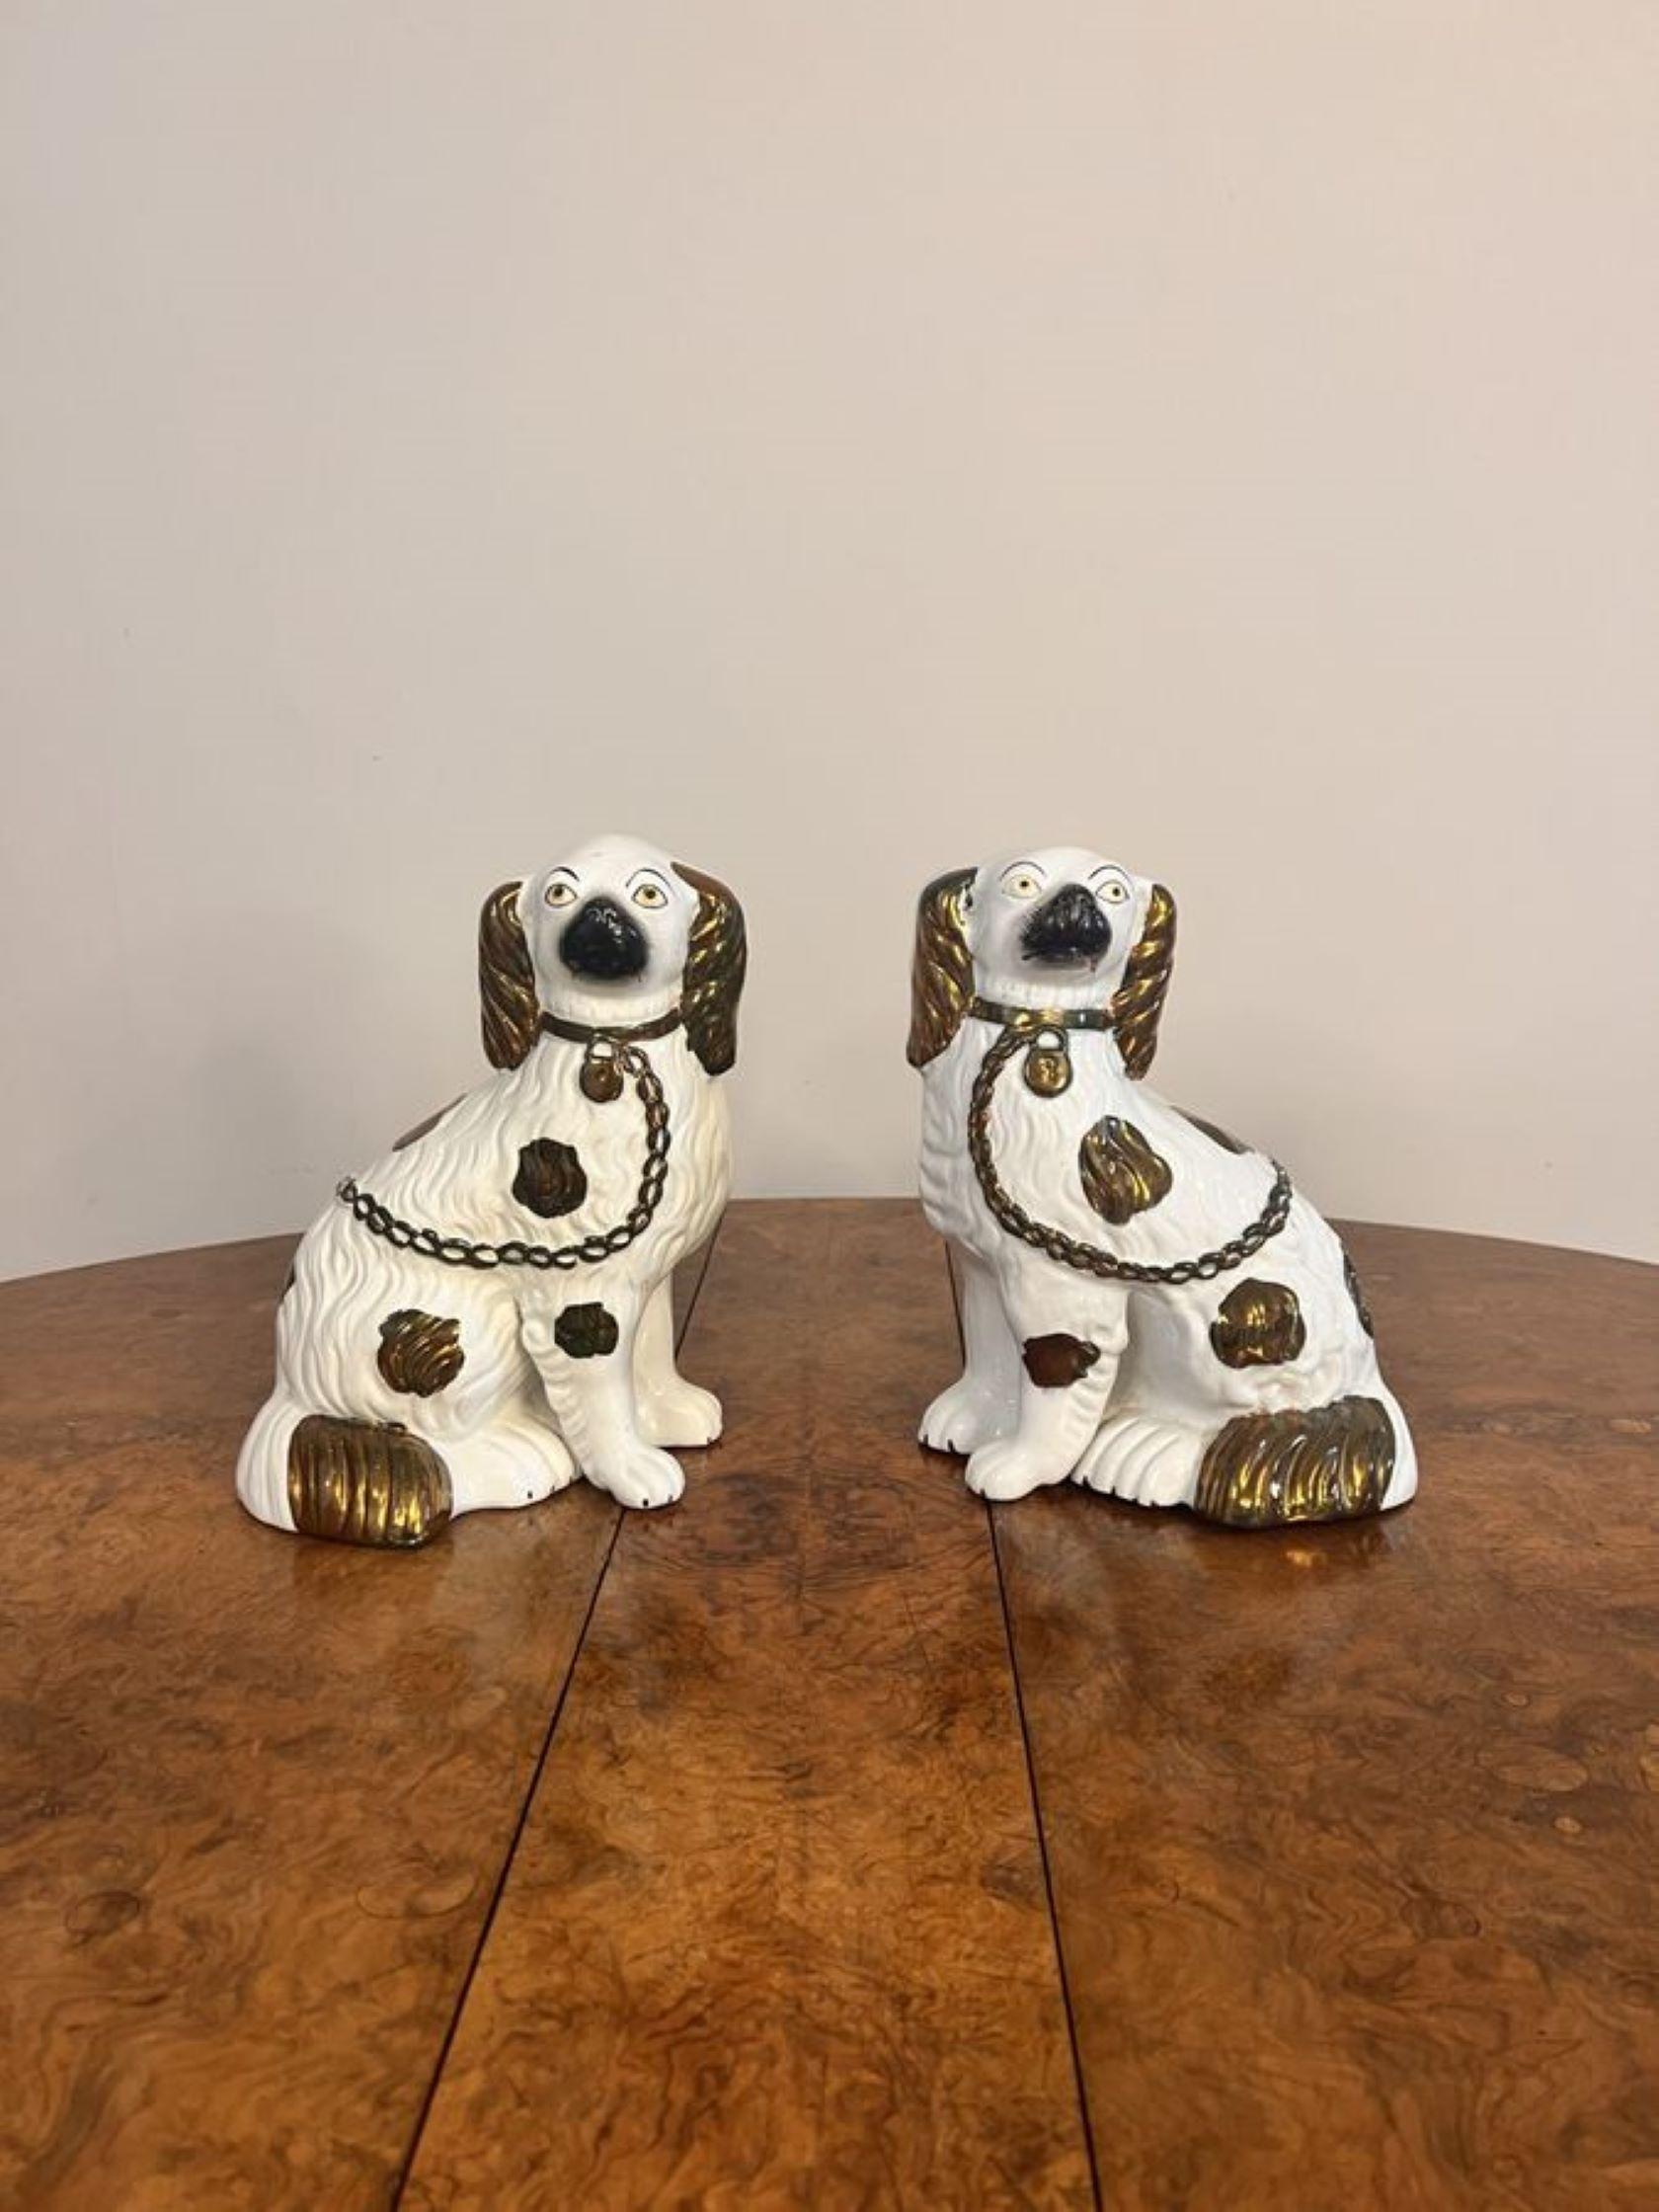 Quality pair of antique Victorian Staffordshire dogs, both seated spaniels with their front legs out, in matching copper brown & white coats, collars, padlocks and chains.

D. 1880